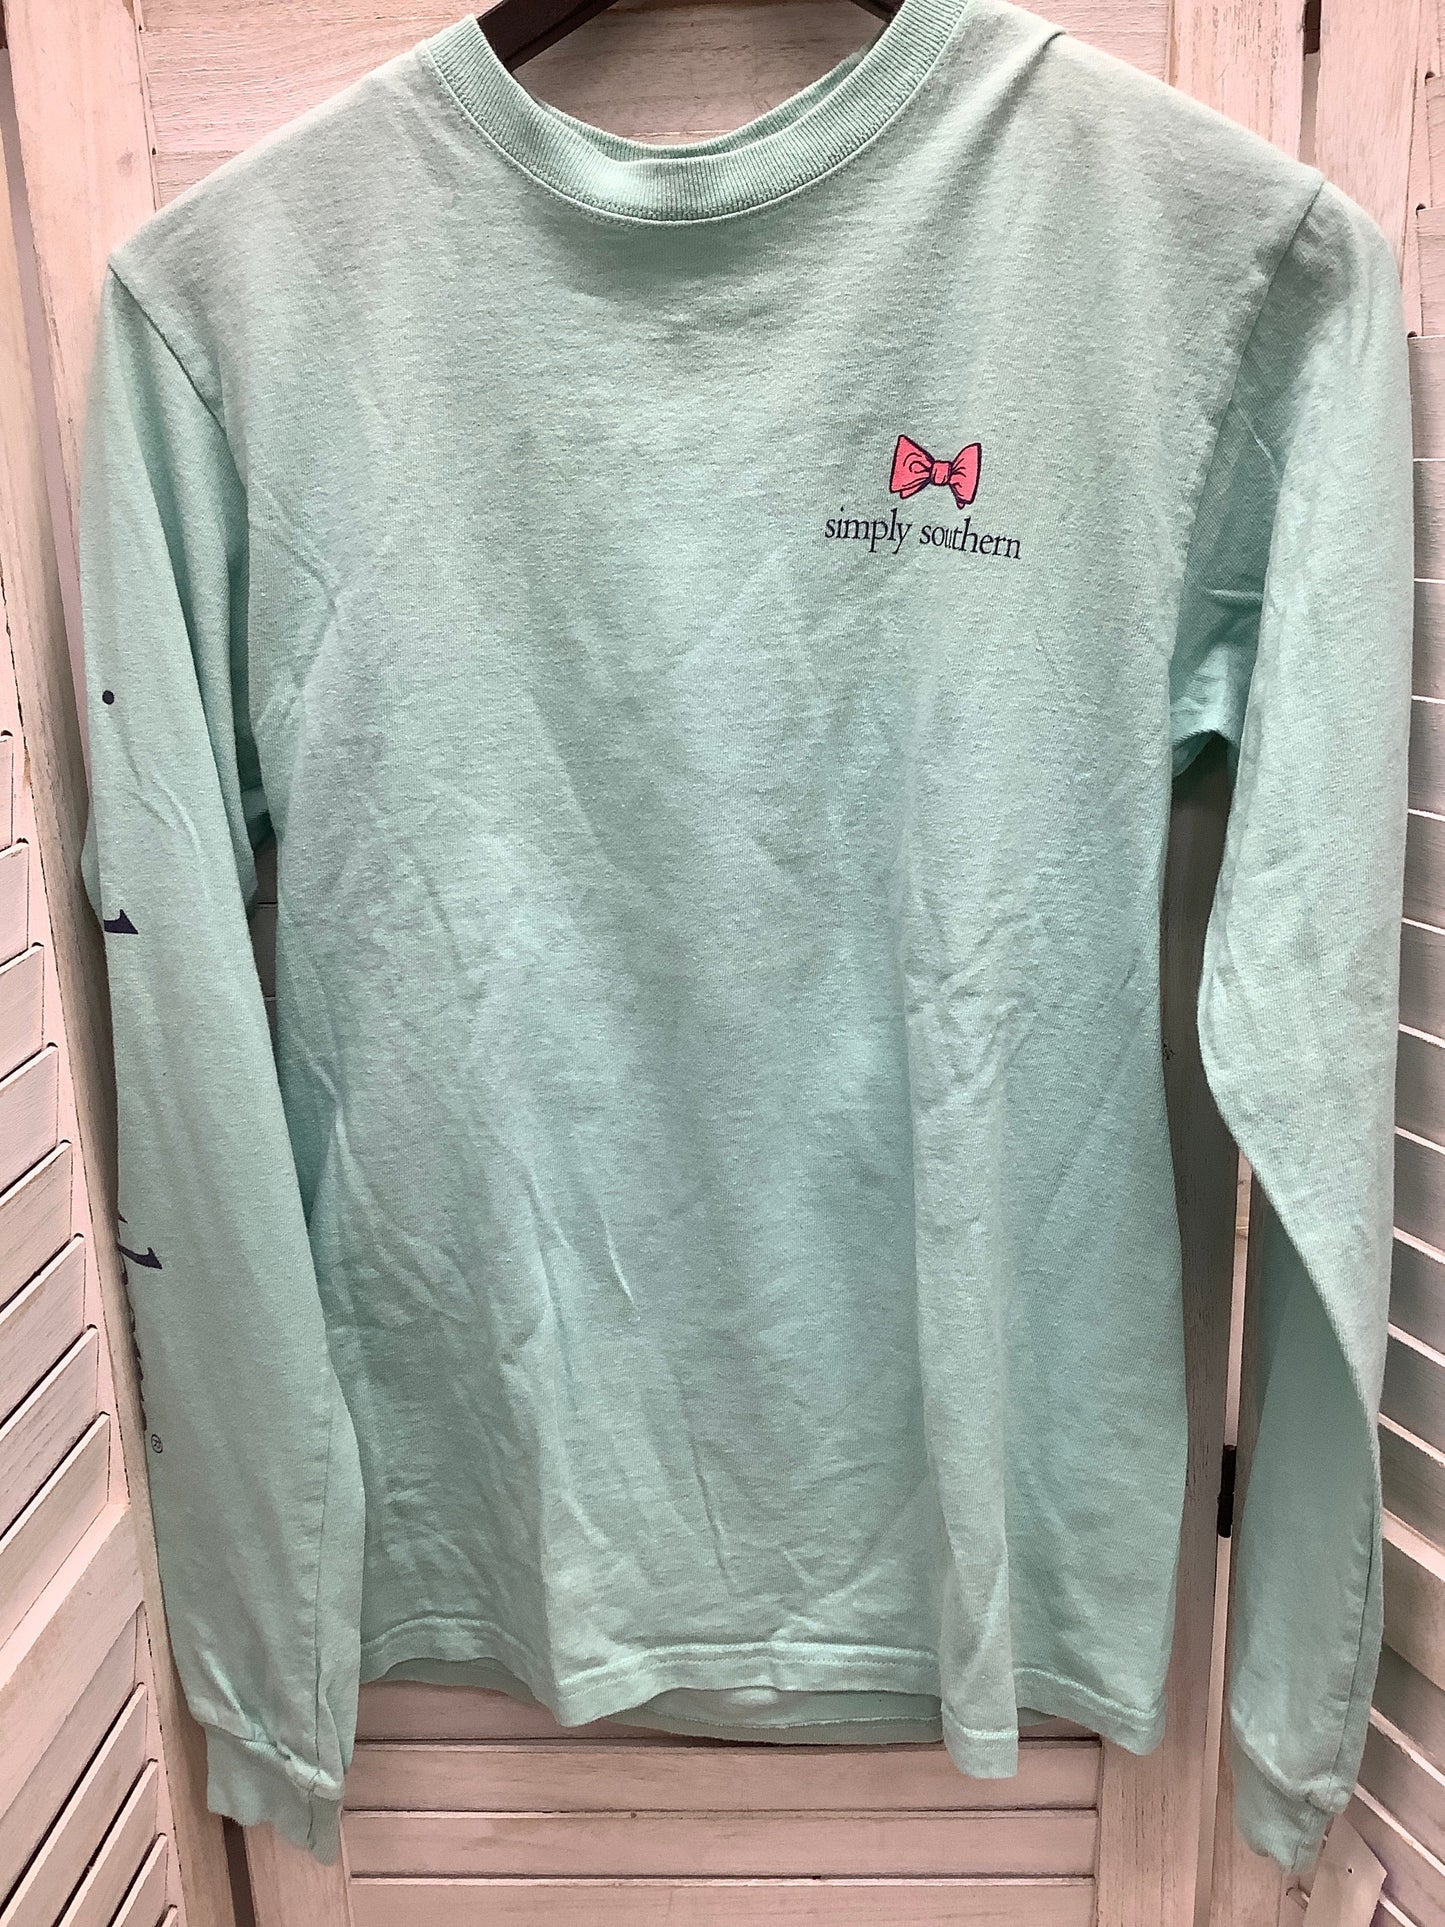 Teal Top Long Sleeve Basic Simply Southern, Size S